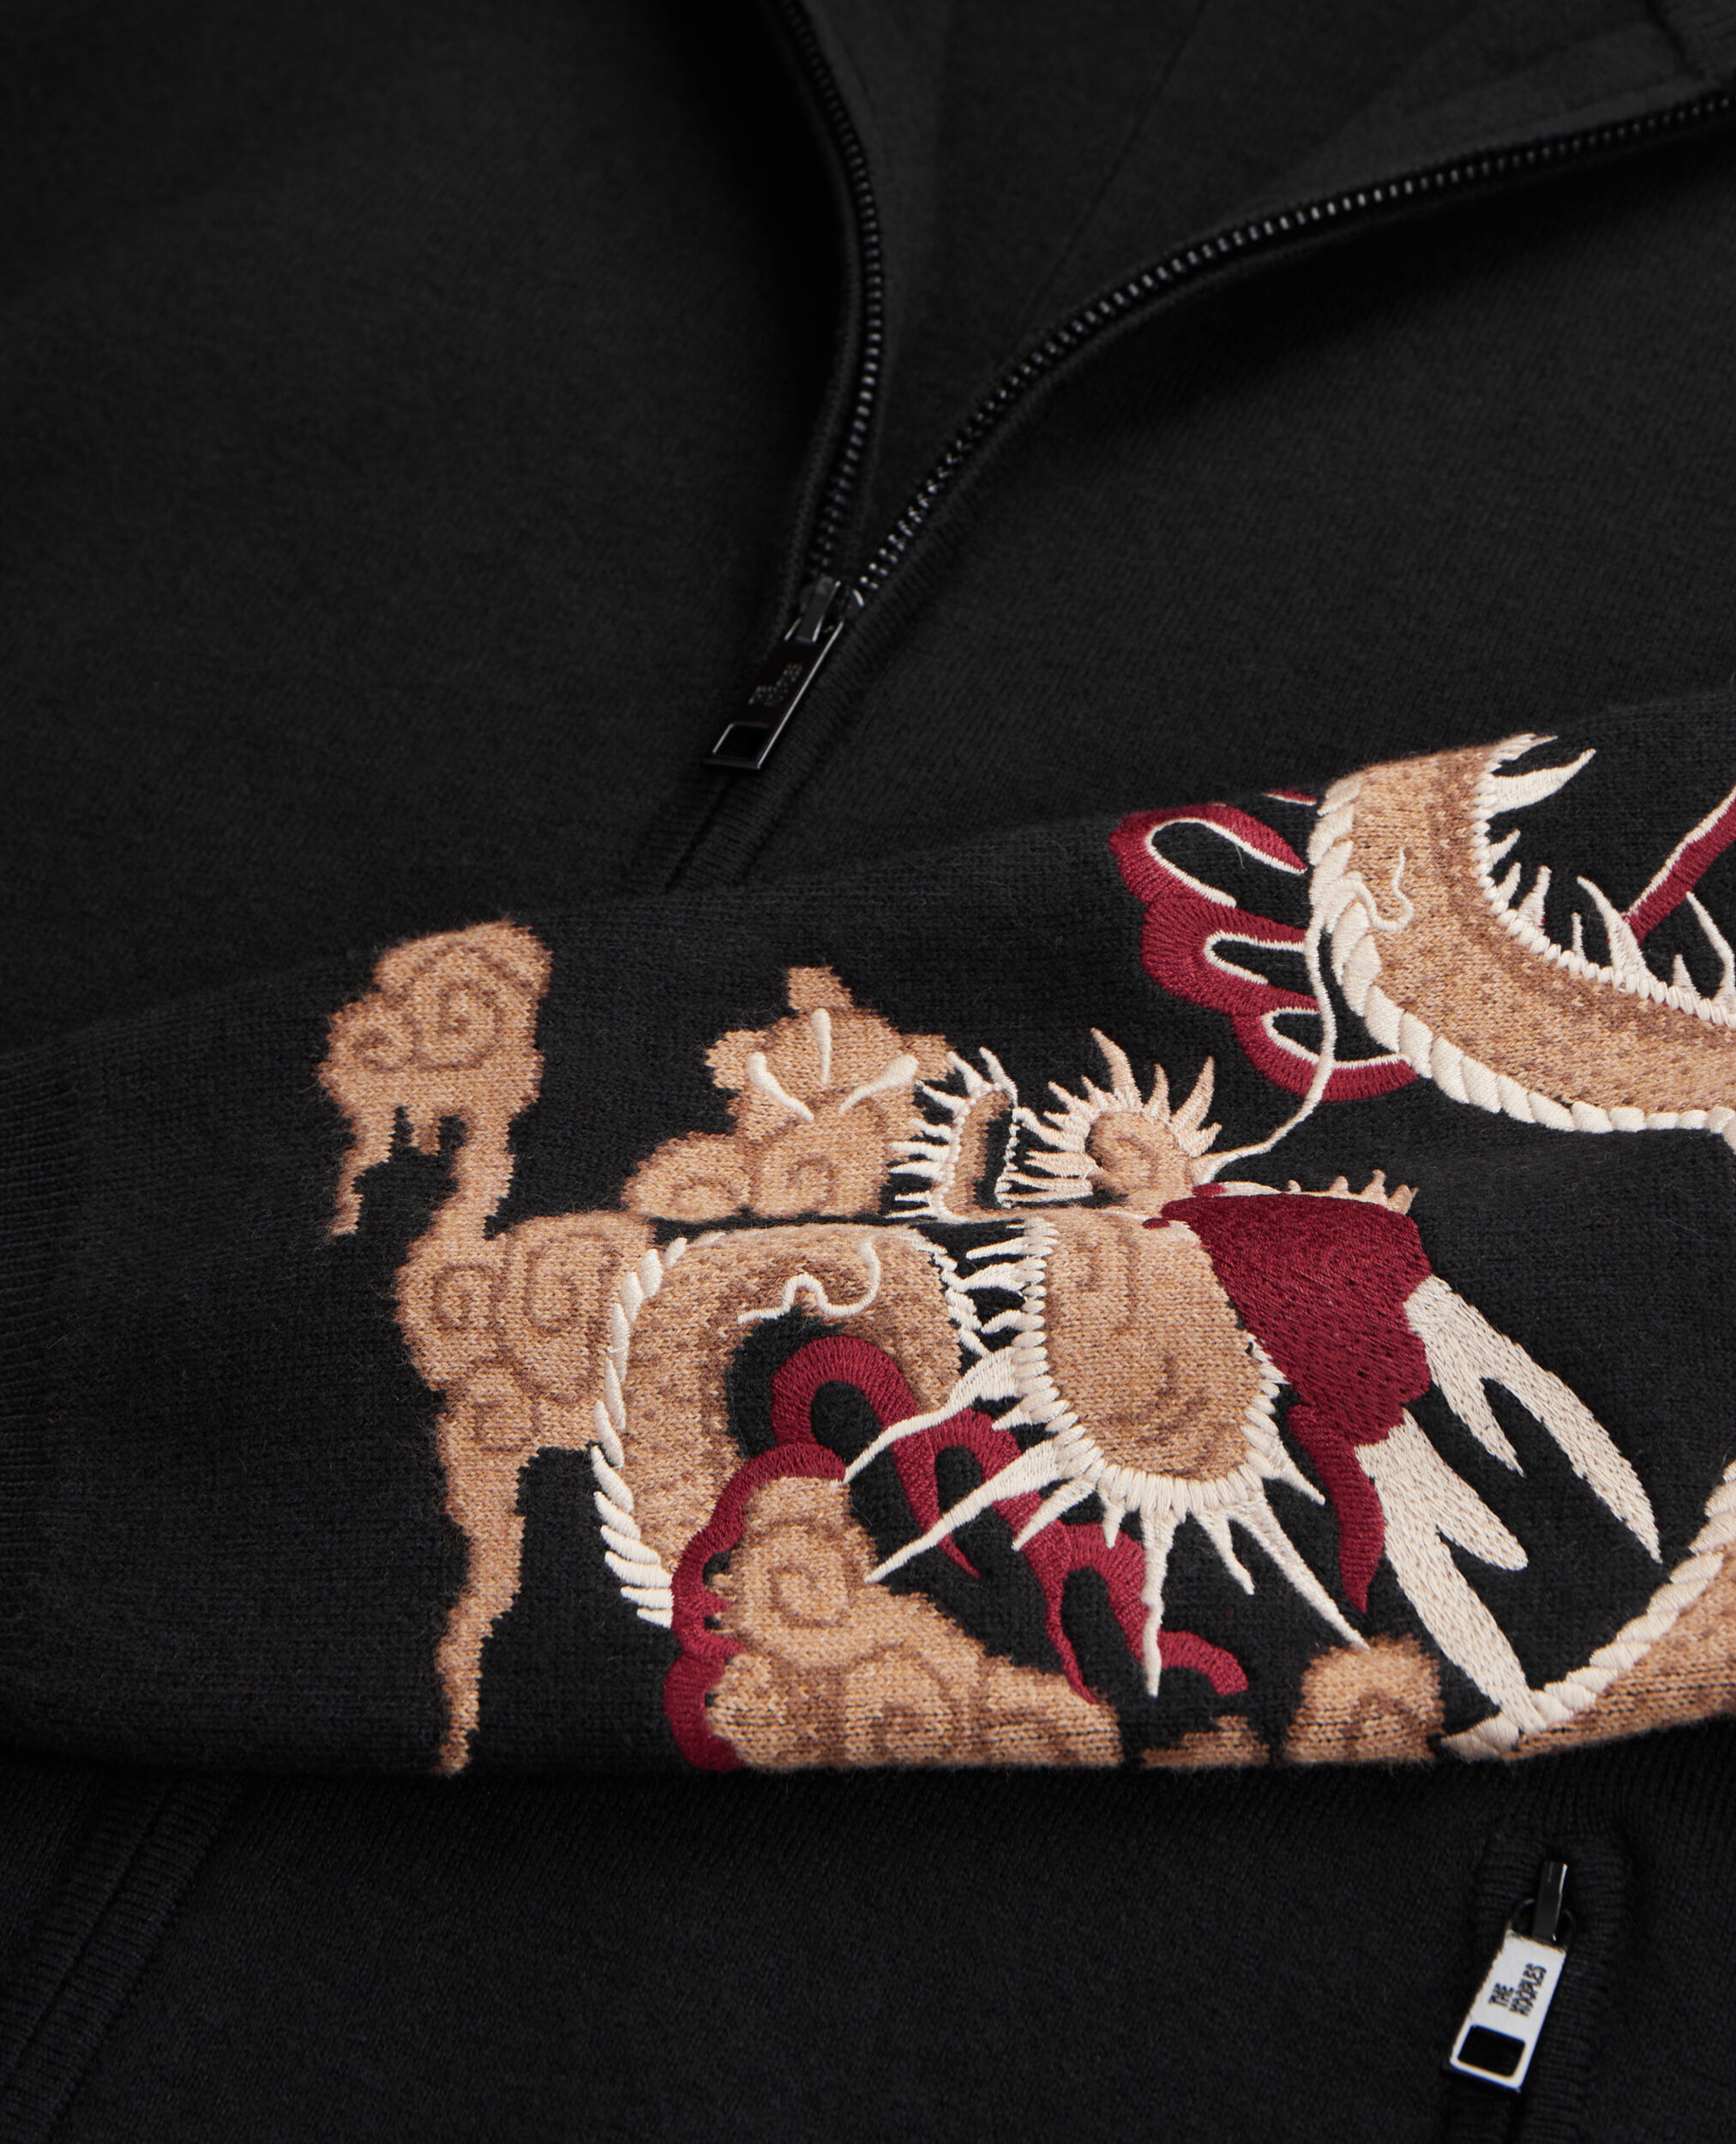 Black wool-blend cardigan with Dragon embroidery, BLACK, hi-res image number null